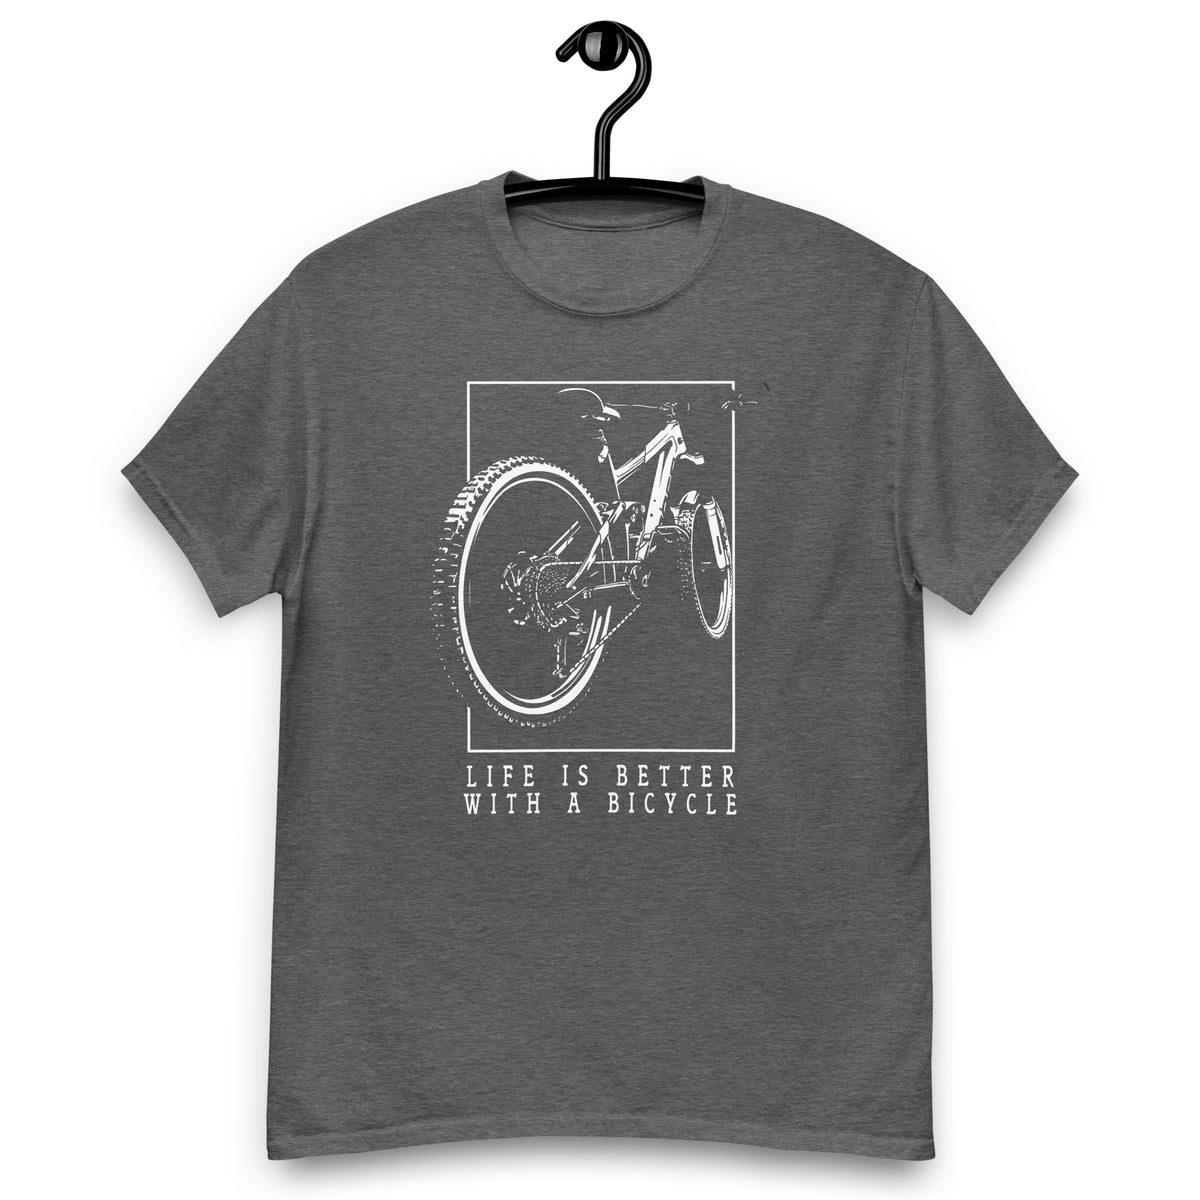 Fahrrad Shirts " Life is better wihe Bicycle "